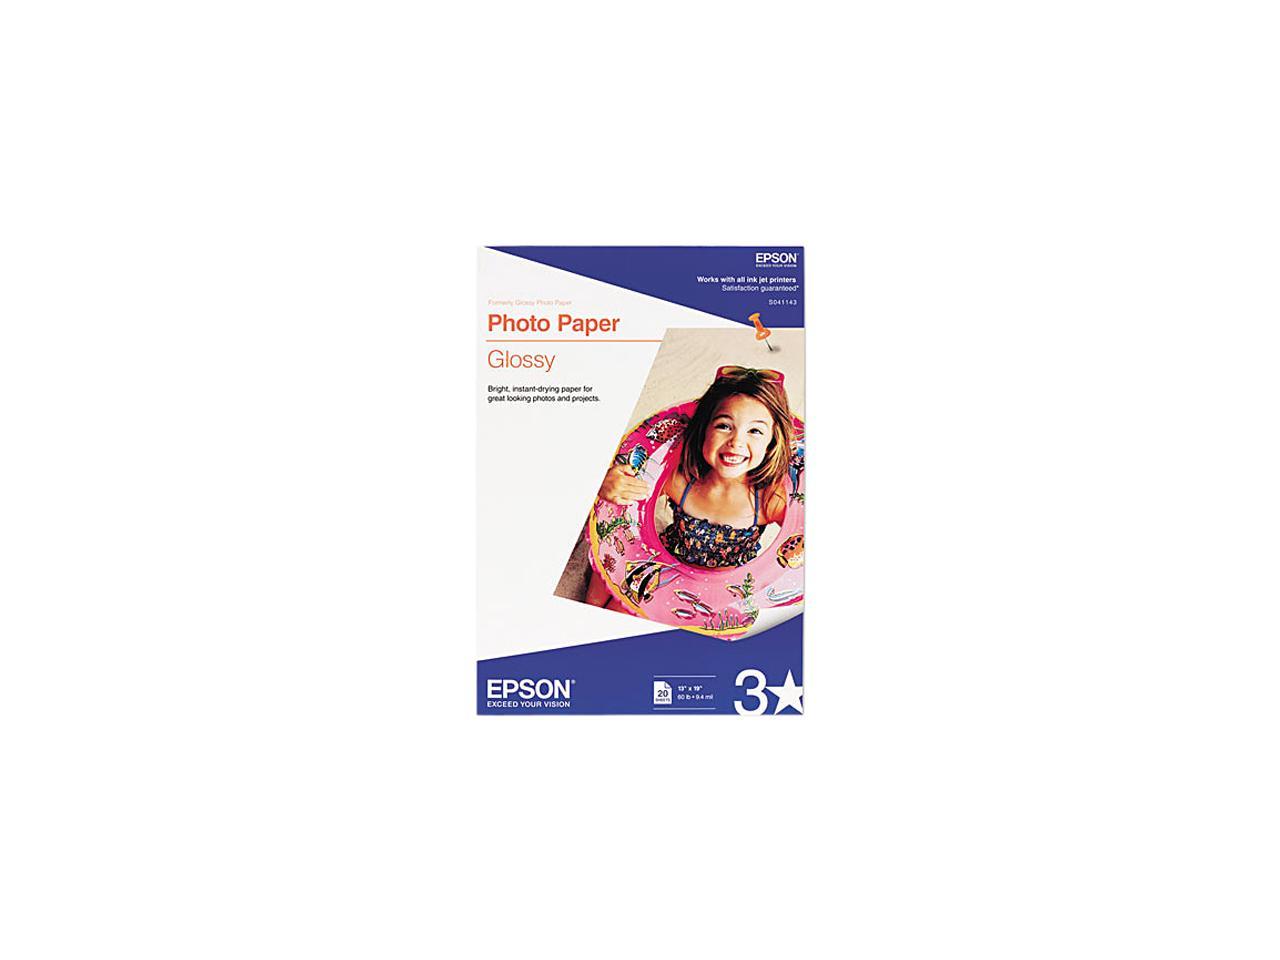 EPSON S041143 Glossy Photo Paper, 60 lbs., Glossy, 13 x 19, 20 Sheets/Pack